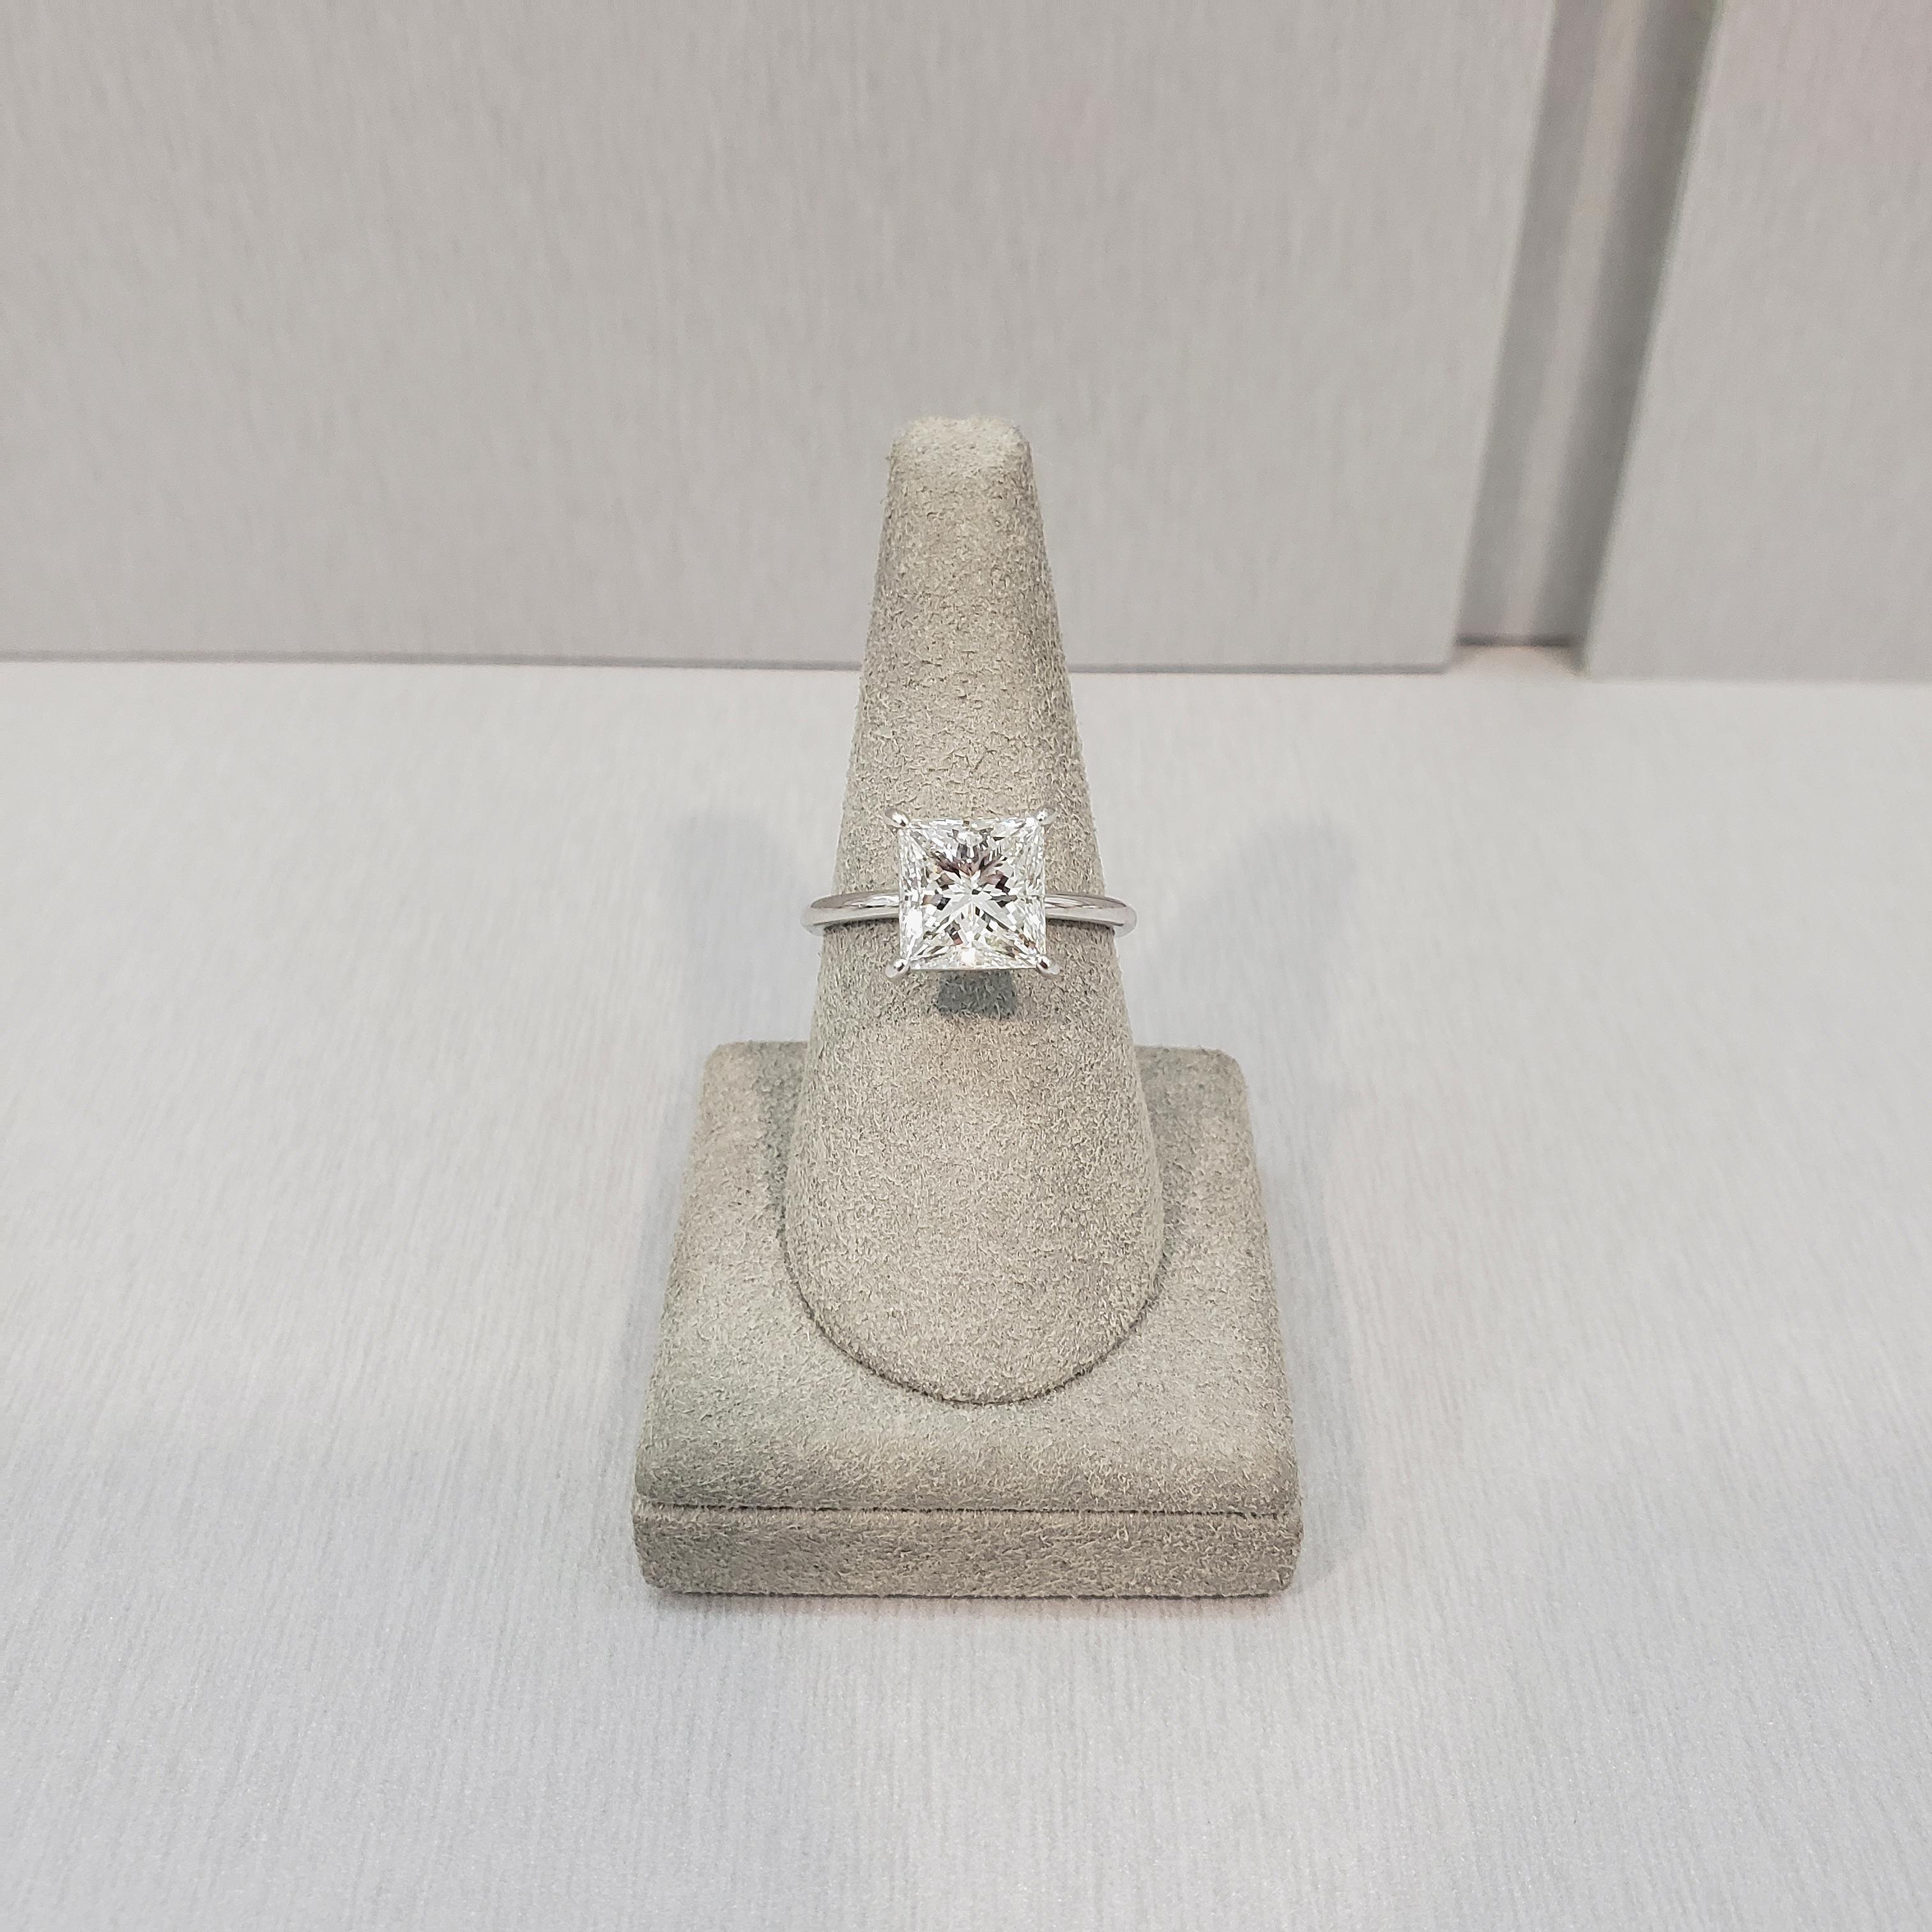 Contemporary GIA Certified 3.06 Carat Princess Cut Diamond Solitaire Engagement Ring